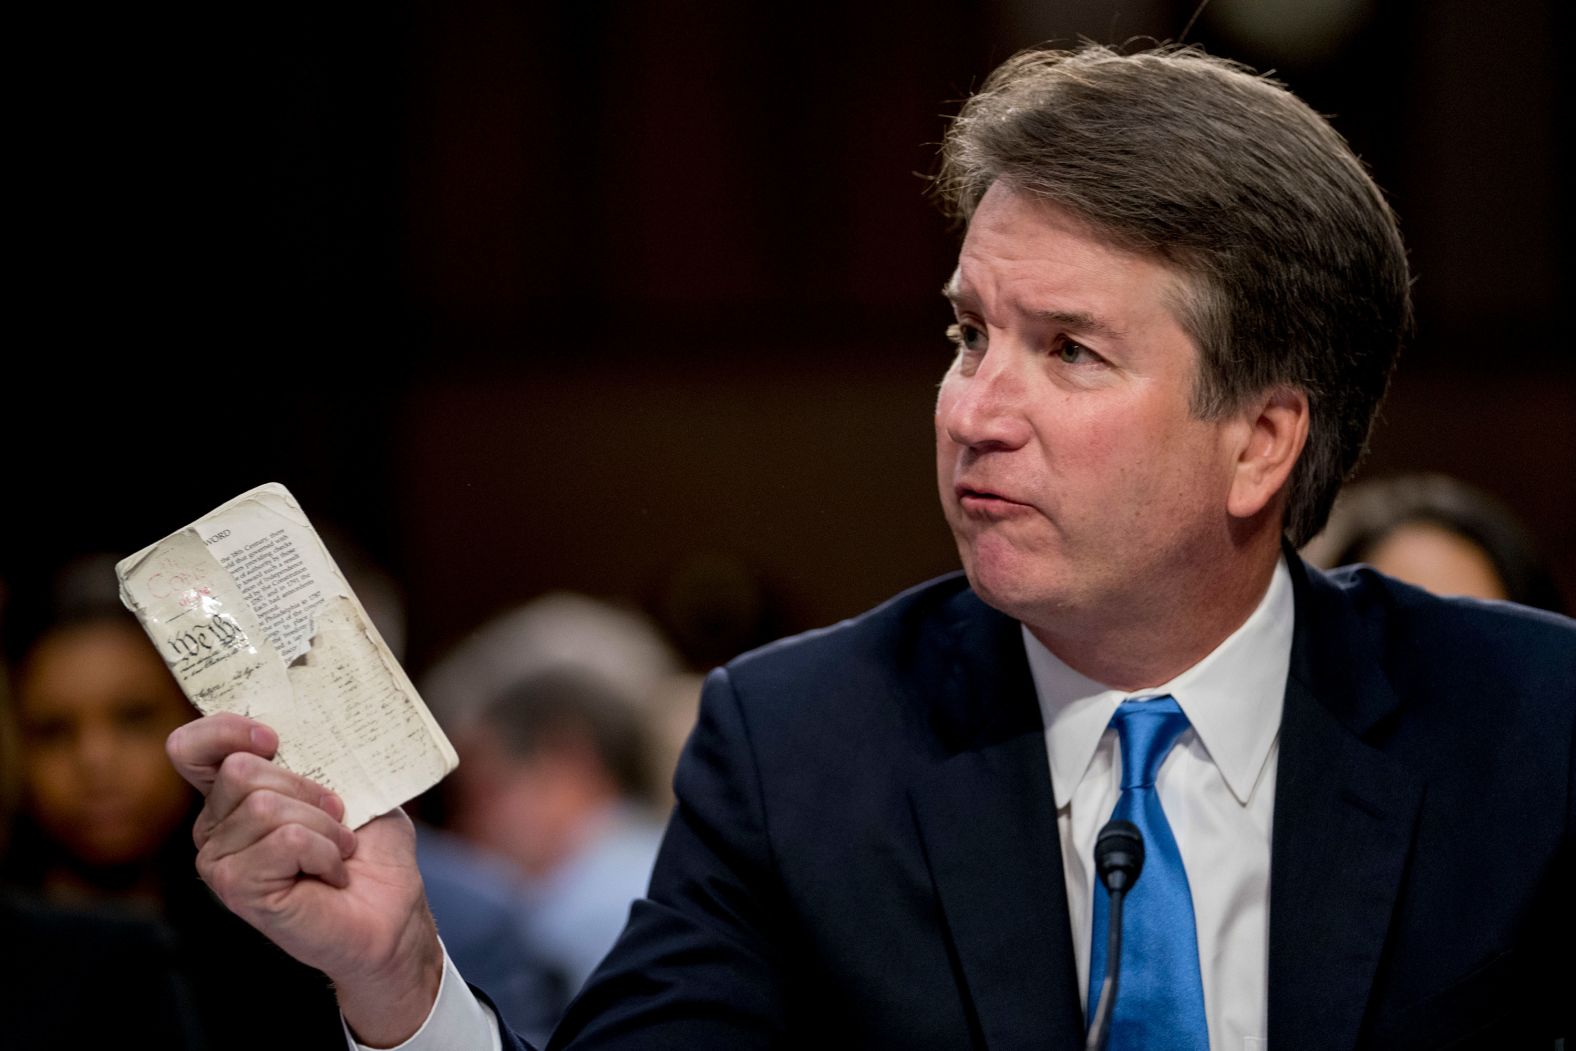 Kavanaugh holds up a worn copy of the Constitution during his testimony on Wednesday. "If confirmed to the Supreme Court and as a sitting judge, I owe my loyalty to the Constitution," he said. "That is what I owe loyalty to. And the Constitution establishes me as an independent judge bound to follow the law as written."